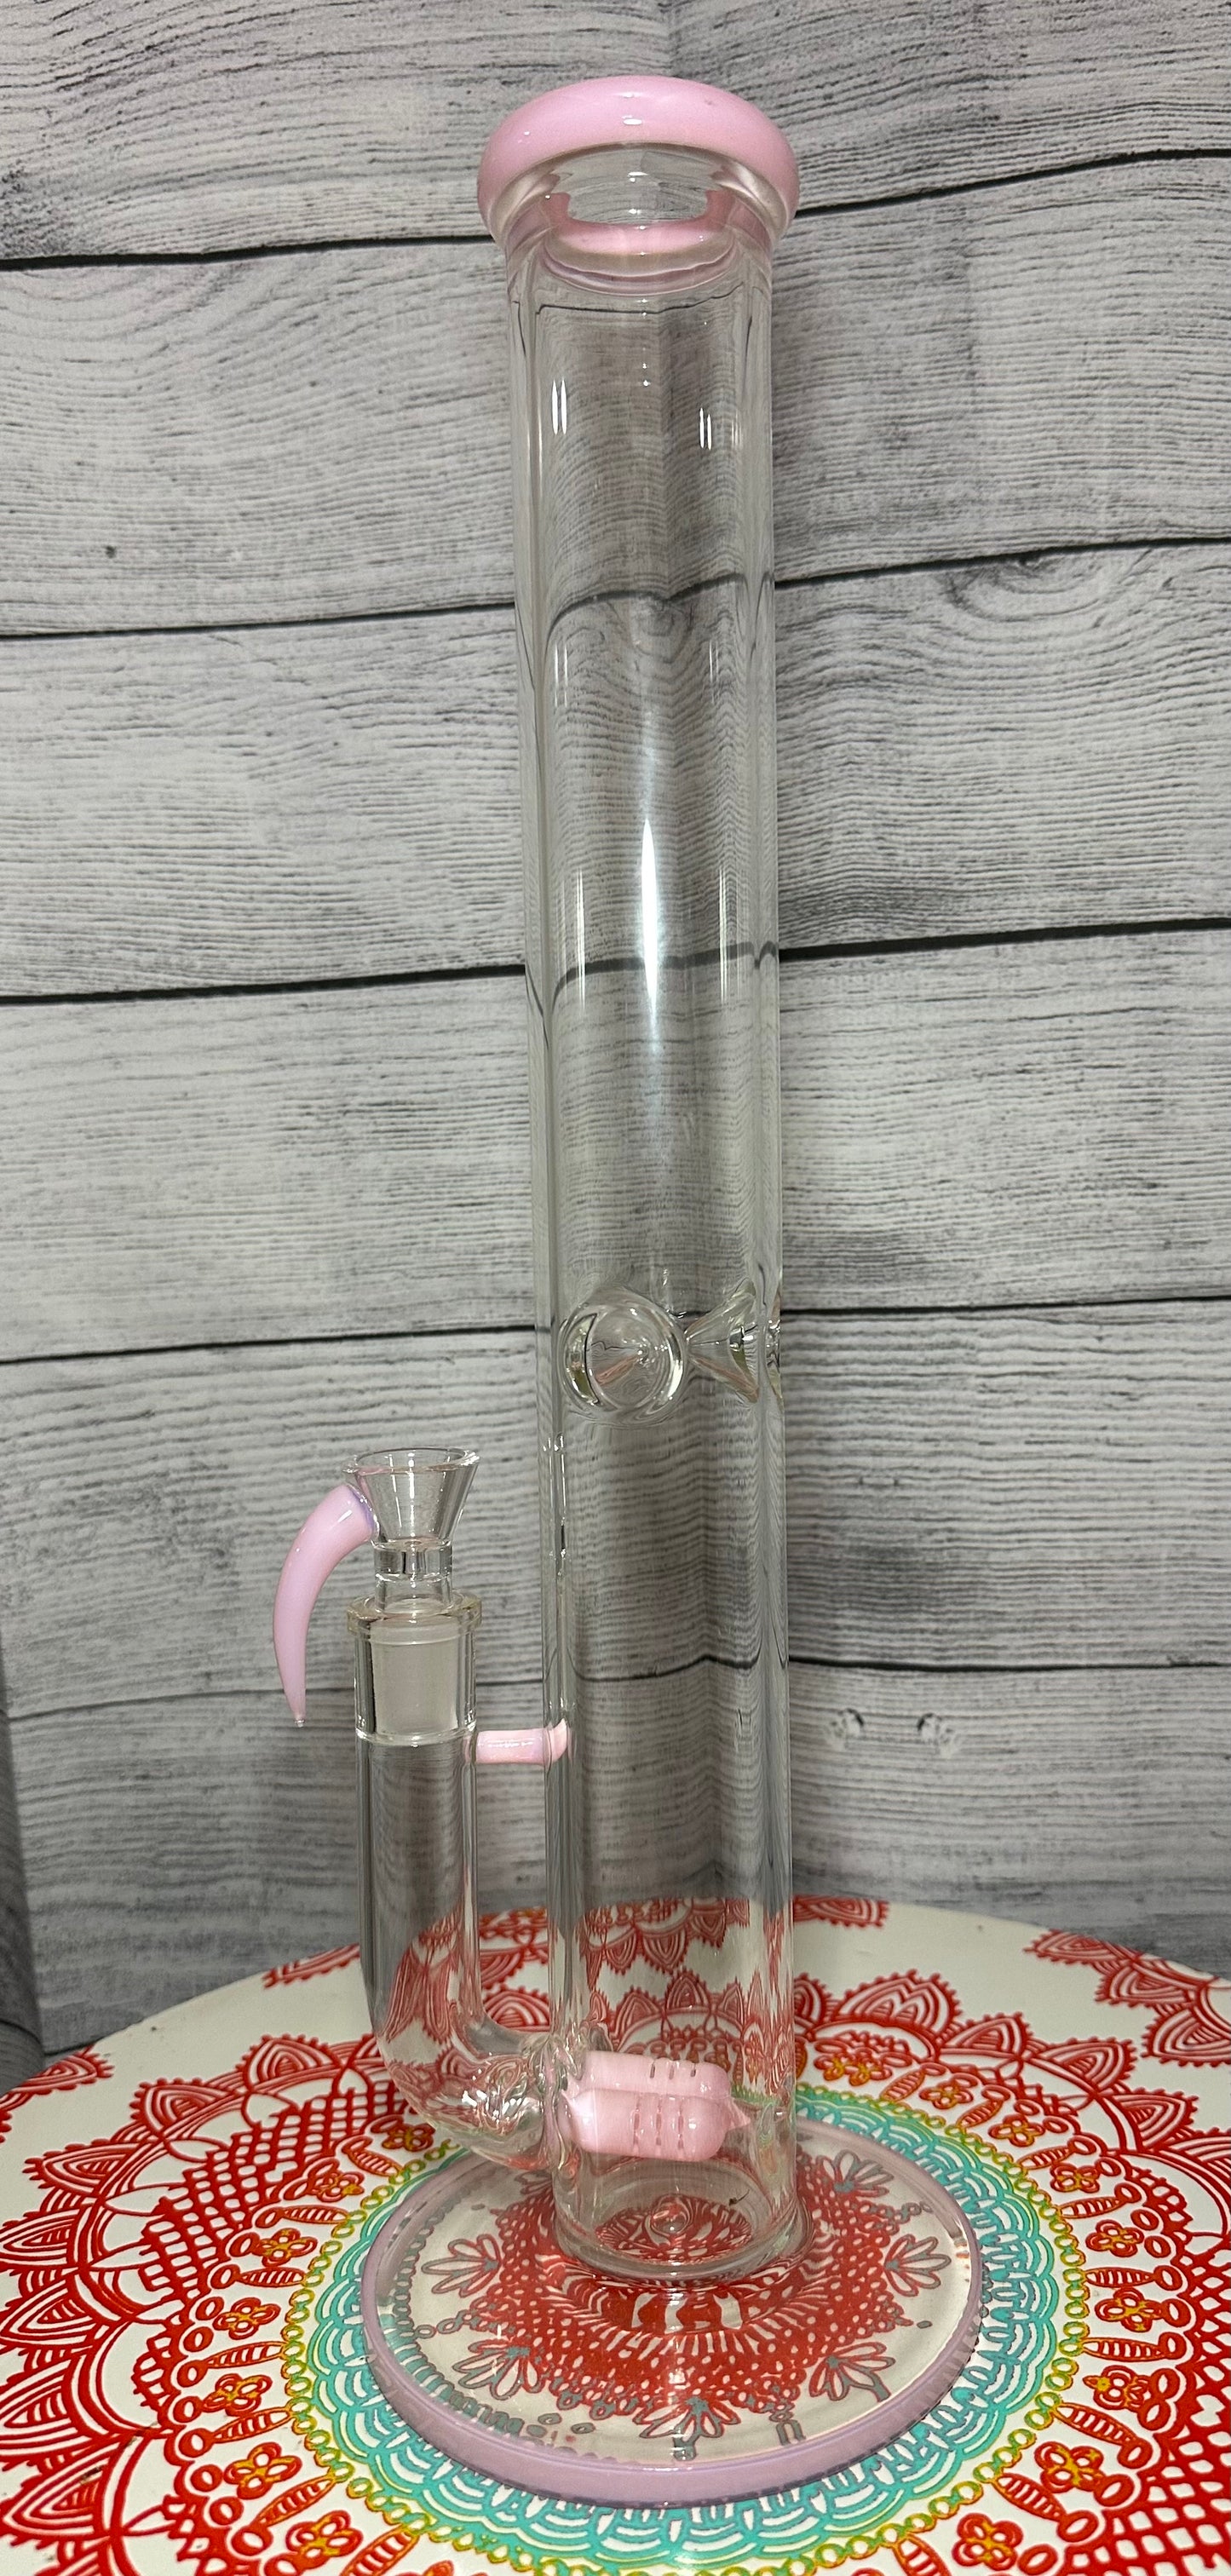 17” Water Pipe